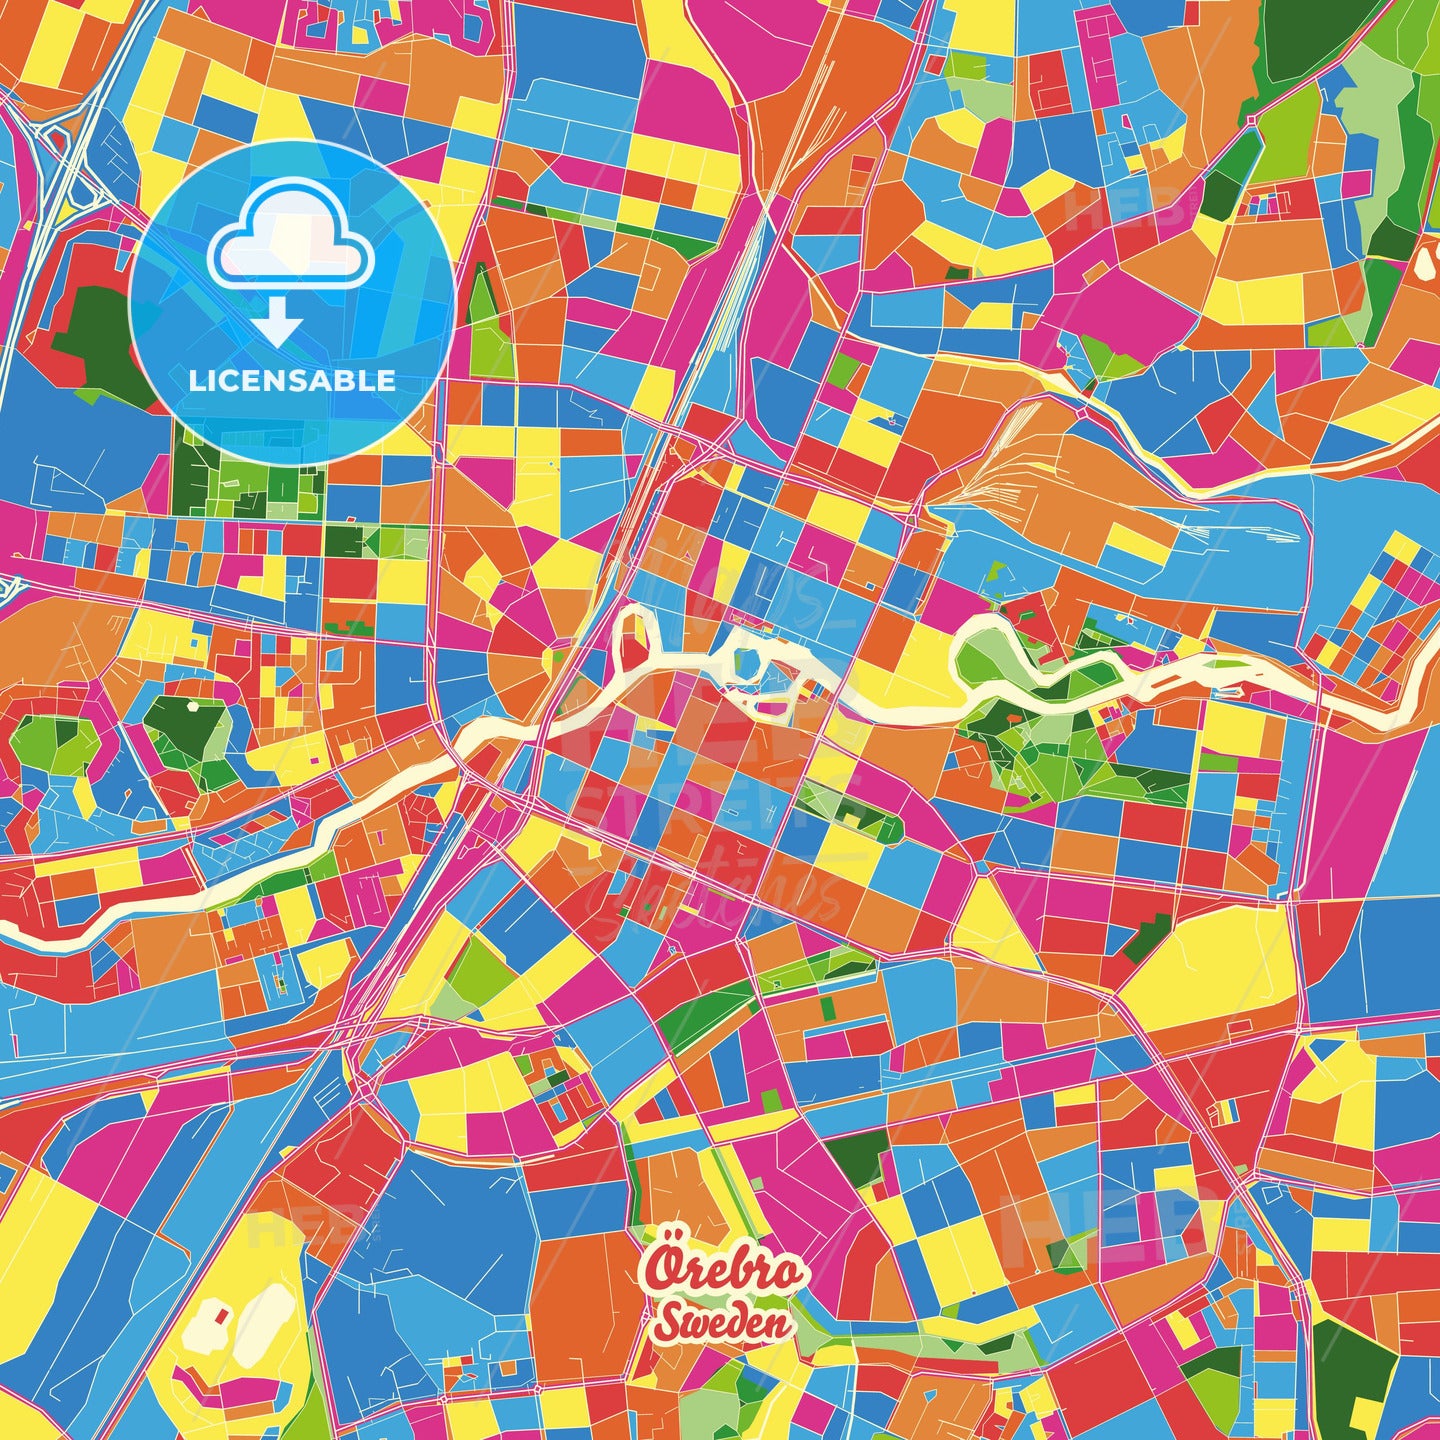 Örebro, Sweden Crazy Colorful Street Map Poster Template - HEBSTREITS Sketches